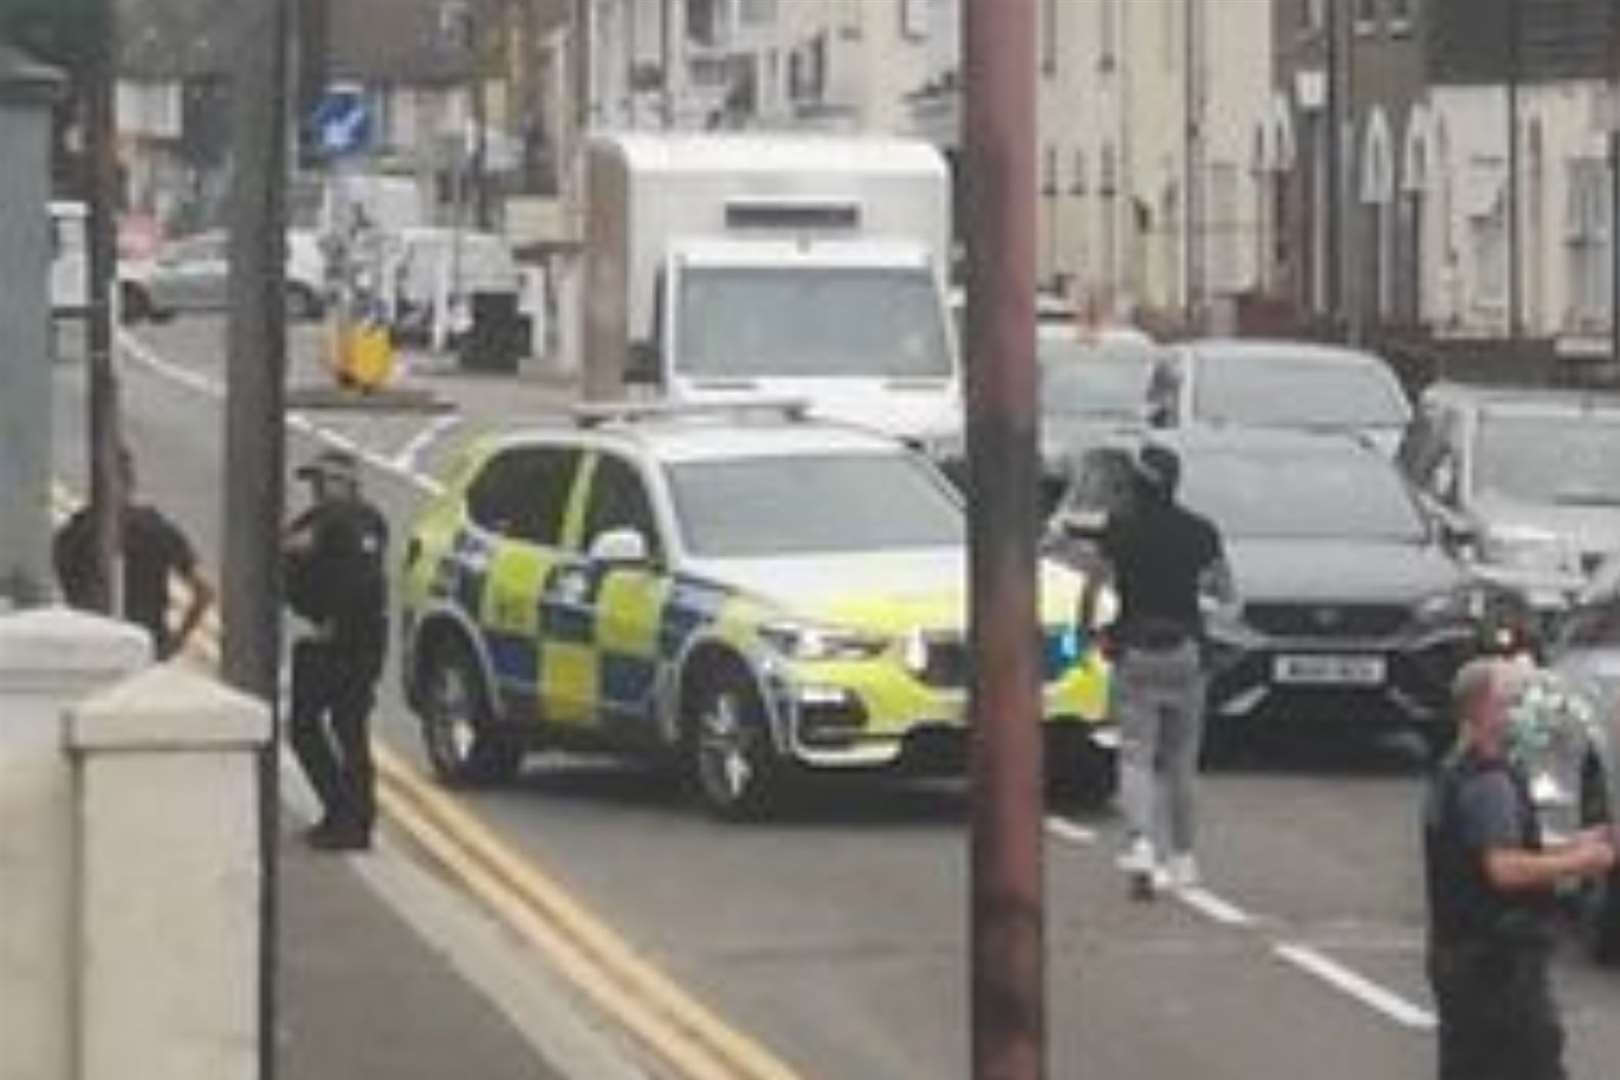 Armed police were spotted in Luton Road, Chatham